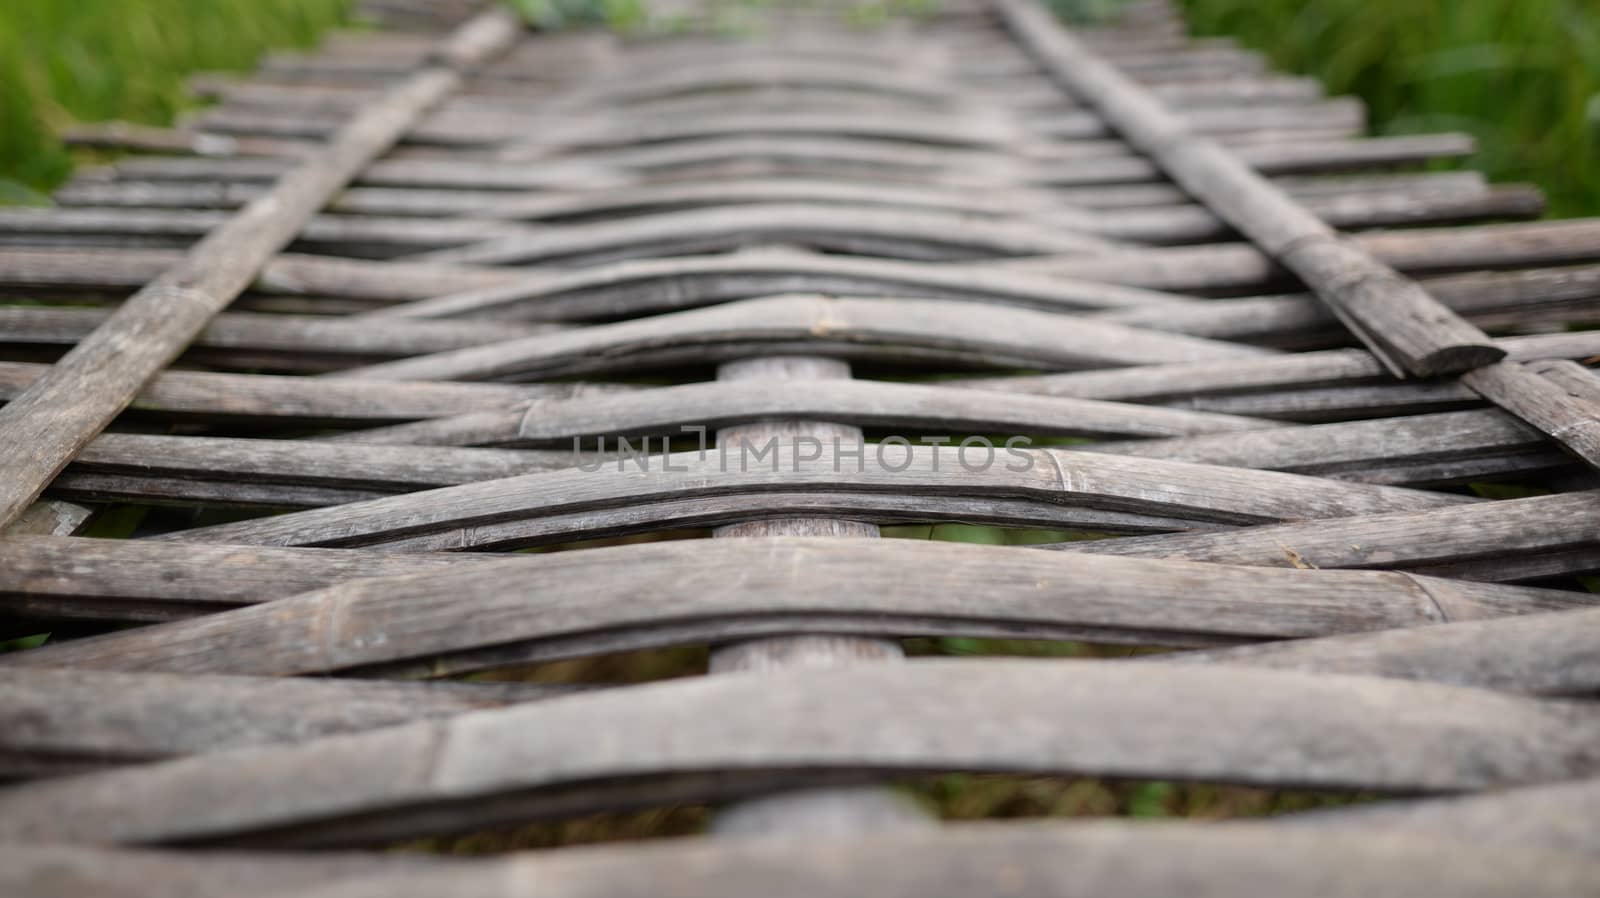 Background image of a bridge made of bamboo weaving together by hellogiant